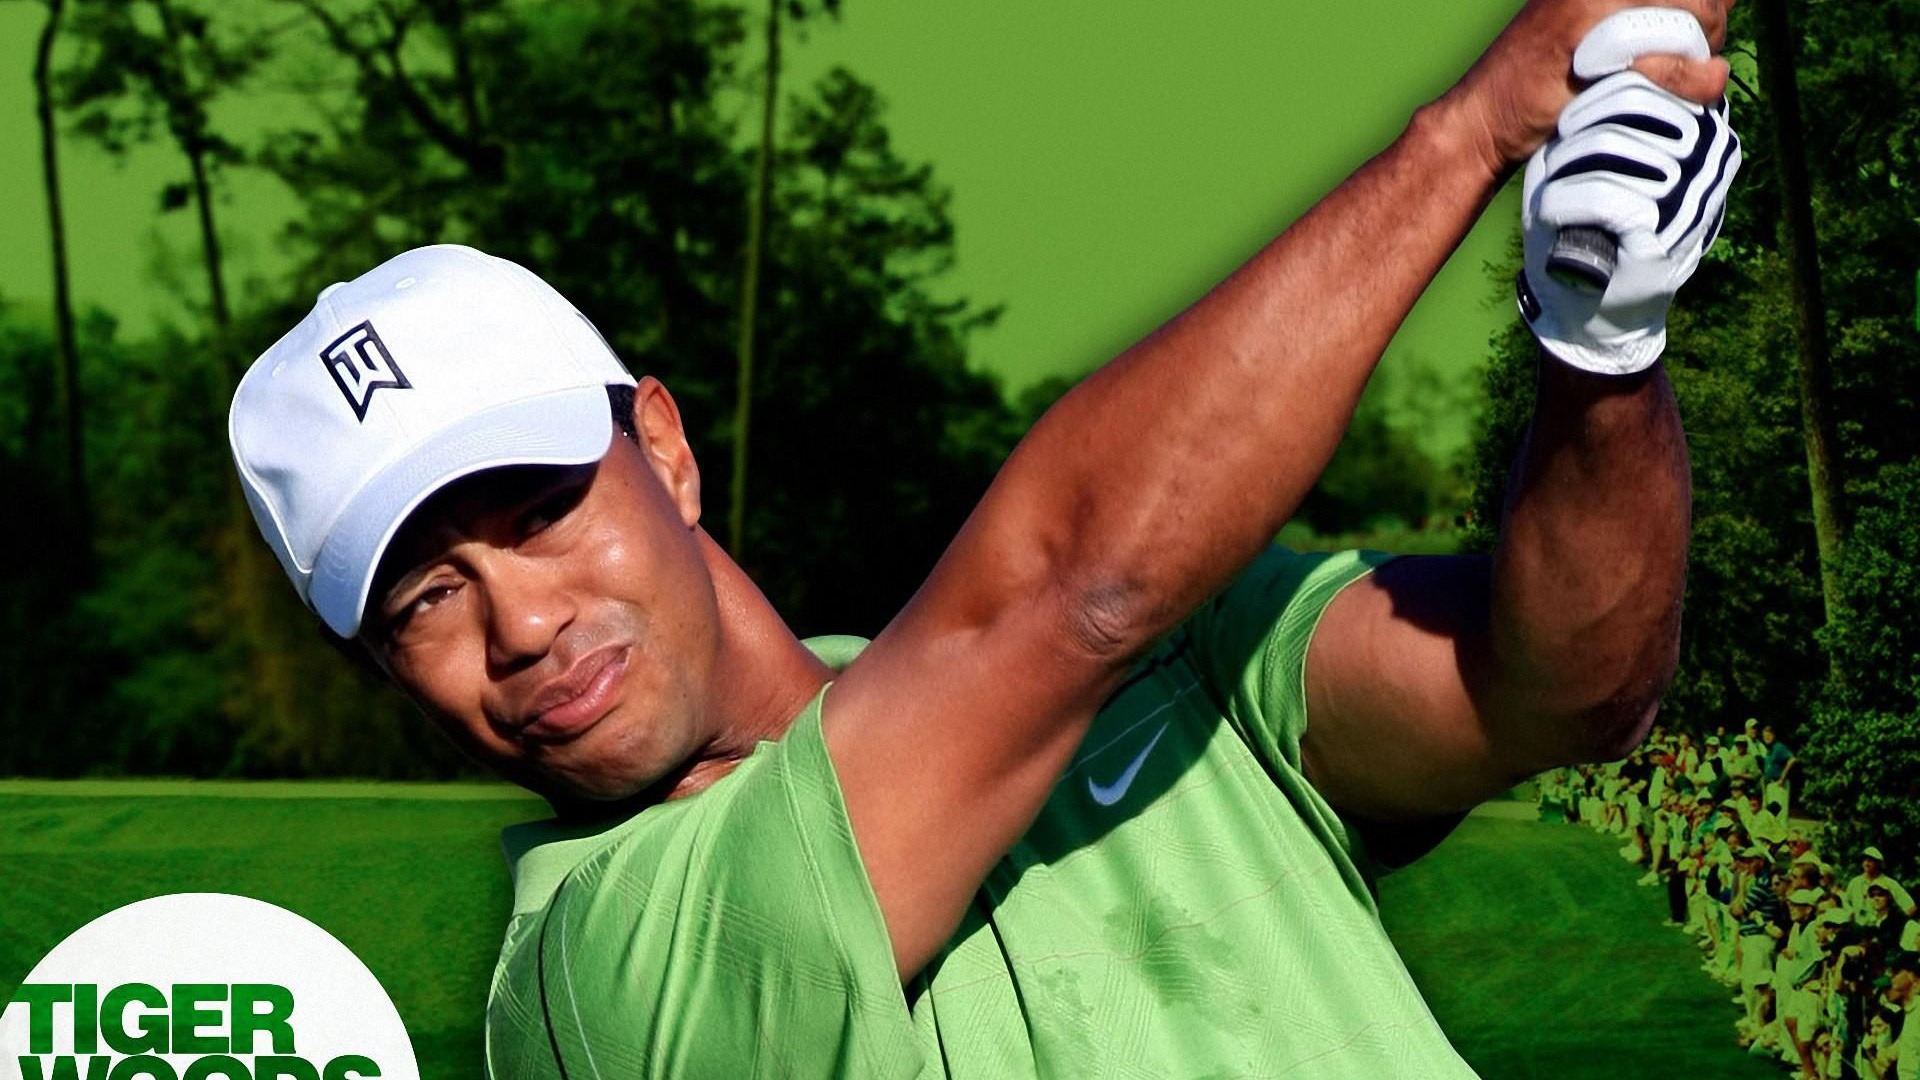 Tiger Woods for 1920 x 1080 HDTV 1080p resolution